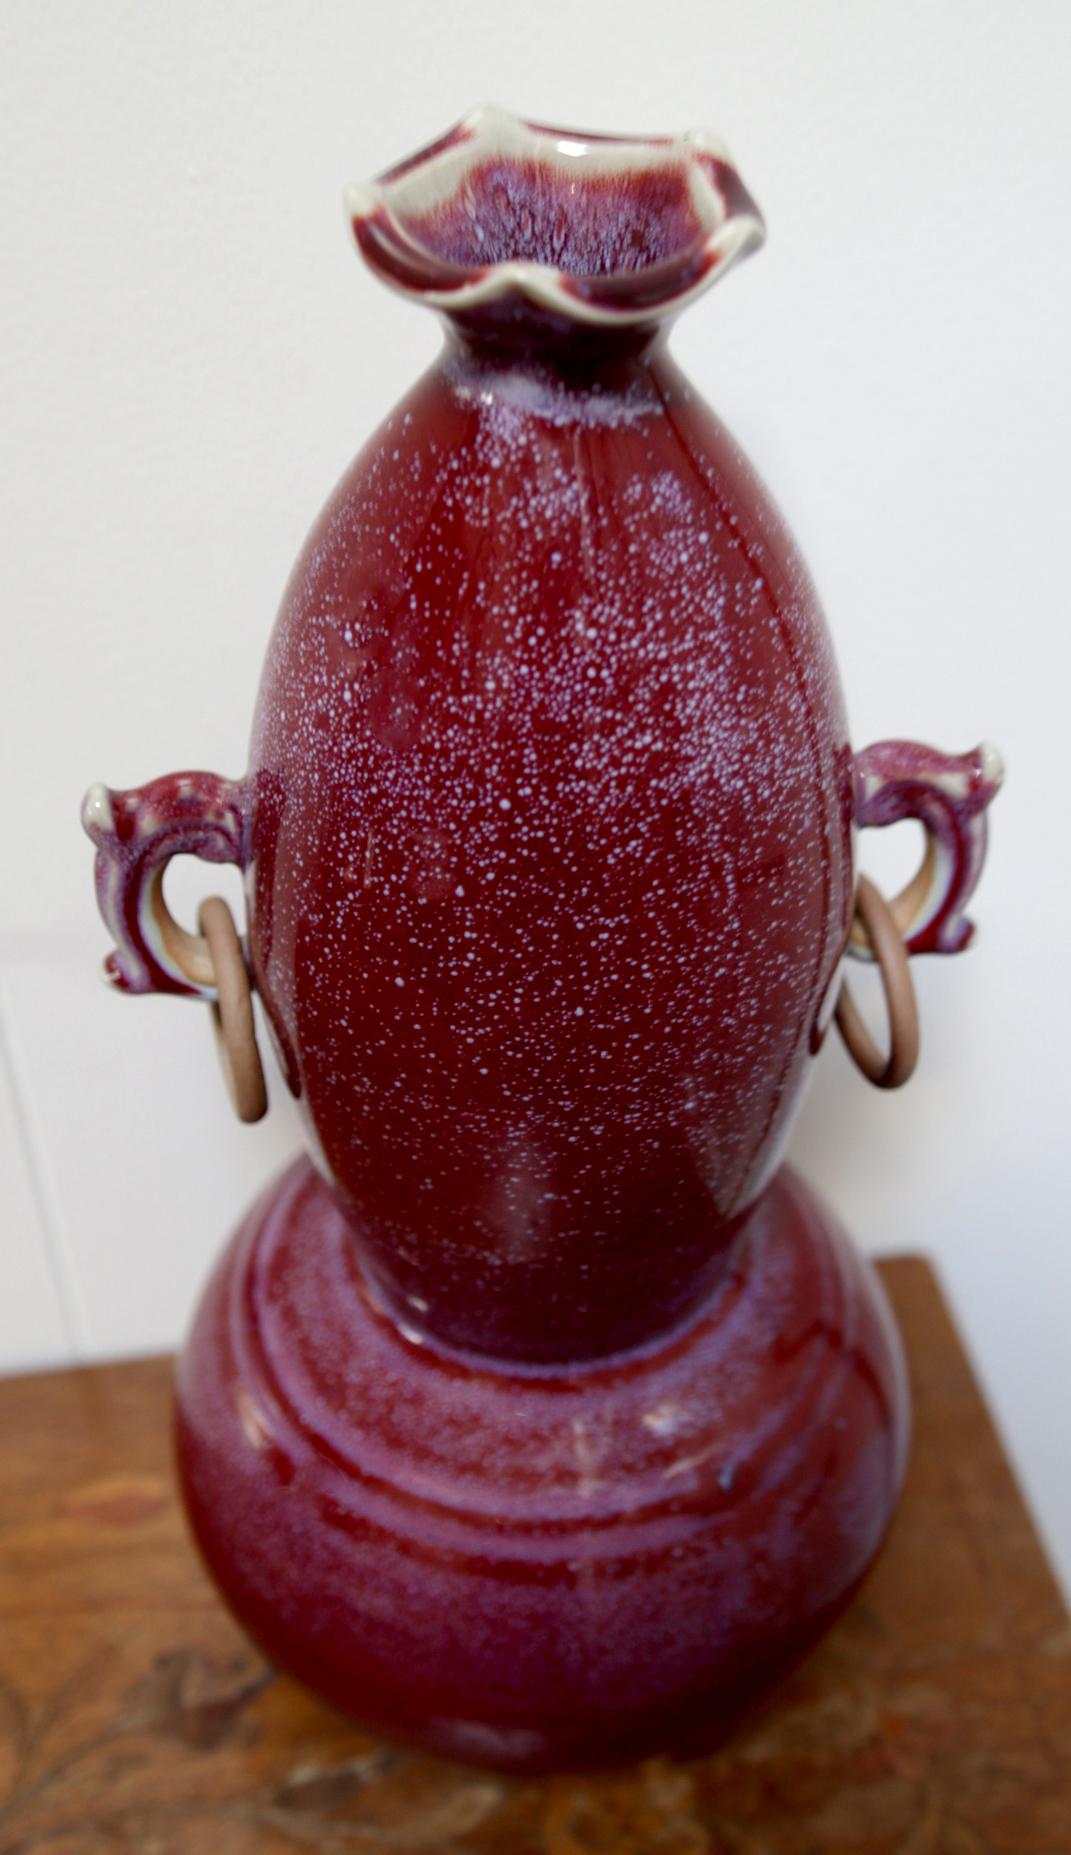 From the antique brass oxidized copper rings that hang from the ears, to the gourd shape and body, this is a wonderful example of a highly collectible sang de boeuf, oxblood vase. 
      A late 19th century (circa 1890s) Chinese copper red-glazed